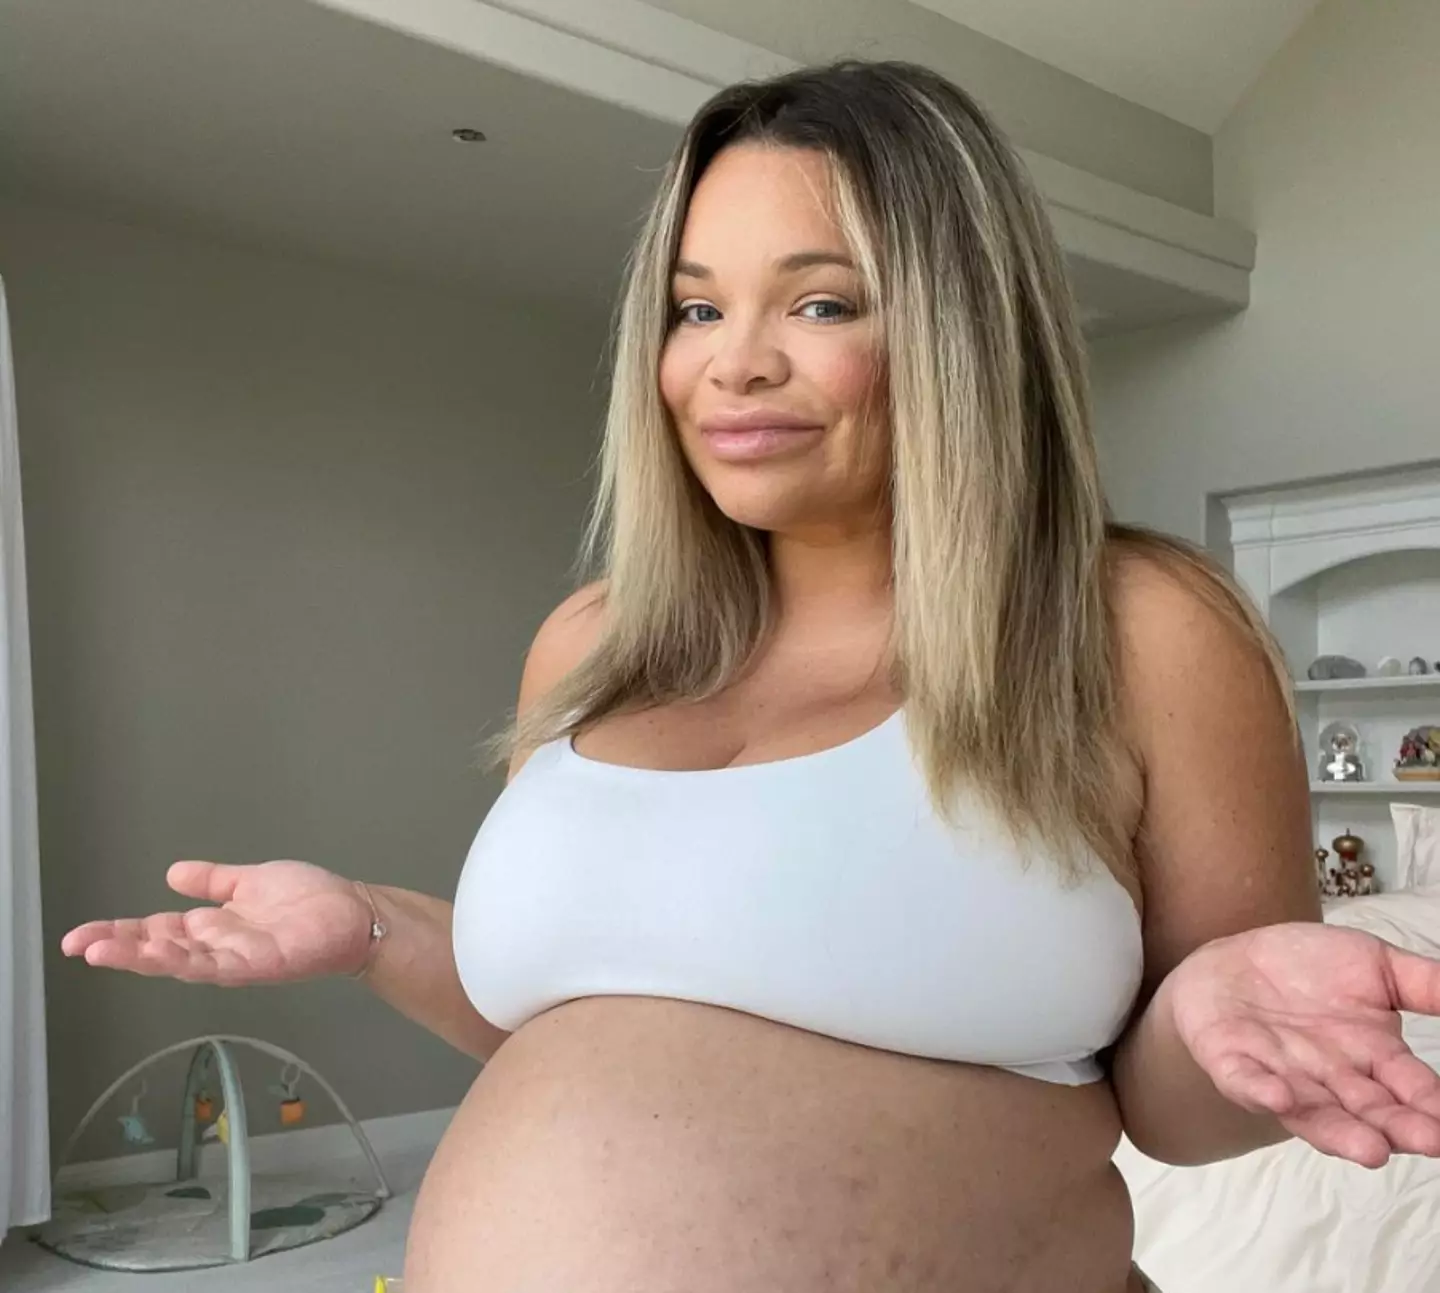 Trisha Paytas has faced criticism over a recent Instagram picture she shared of her daughter.